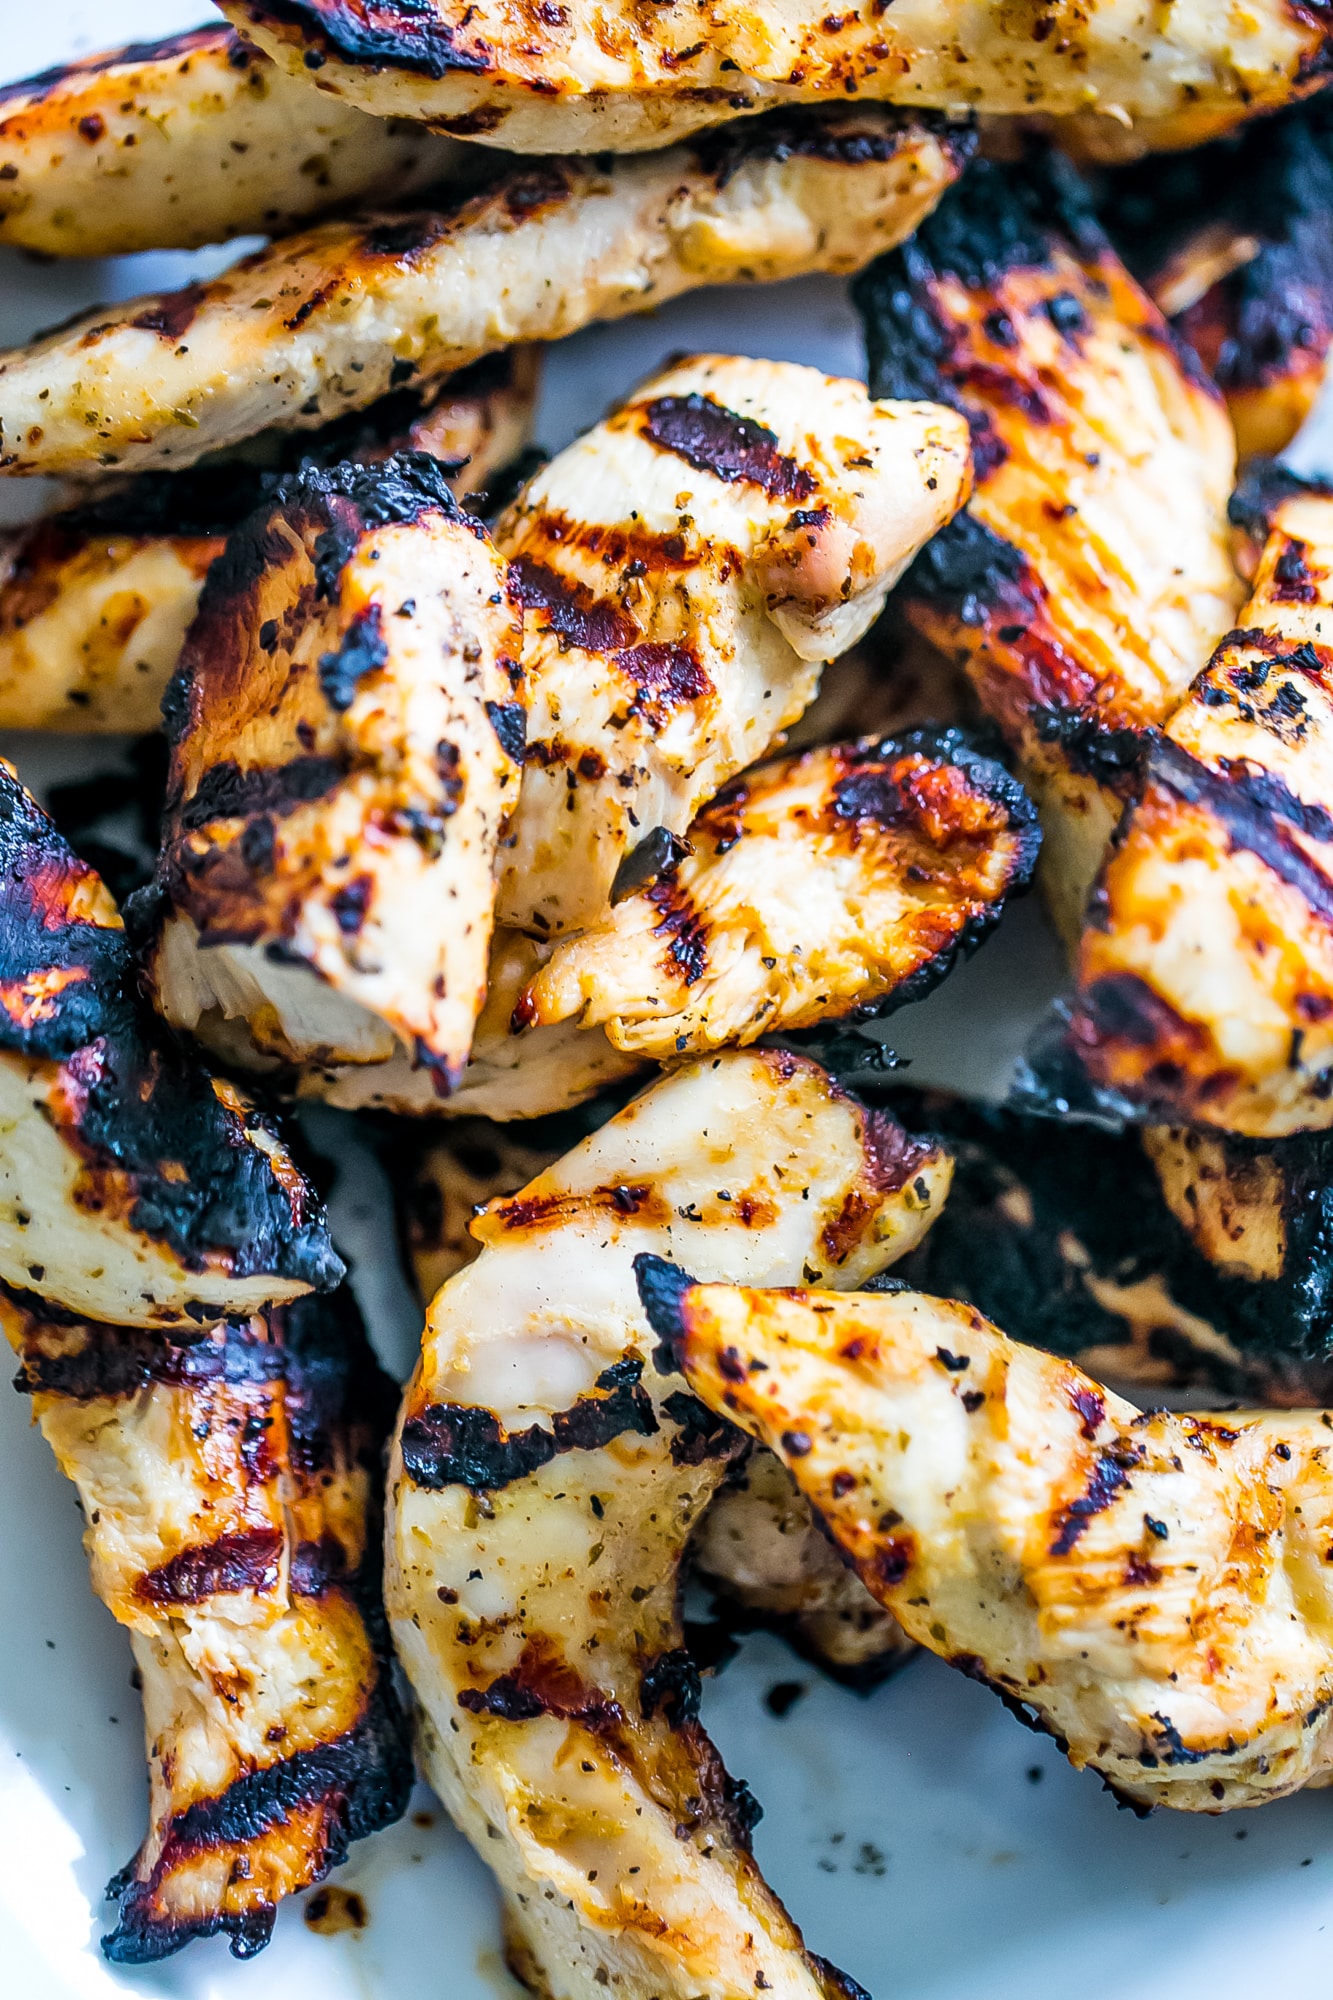 My husband begs for these grilled chicken strips to take to work for lunch! 